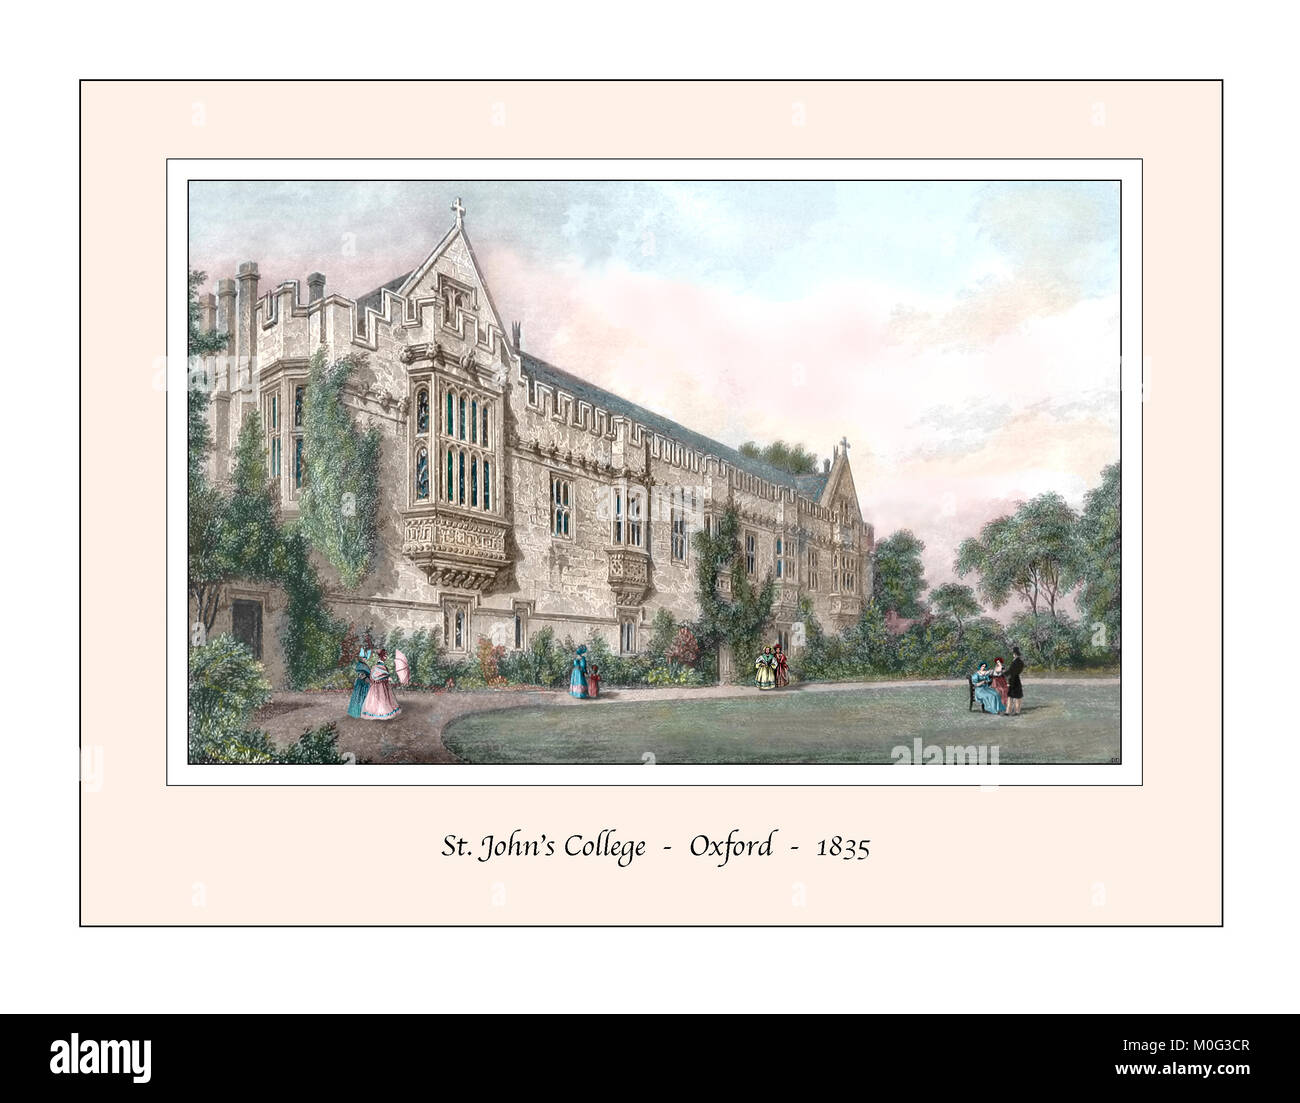 St. John's College Oxford Original Design based on a 19th century Engraving Stock Photo